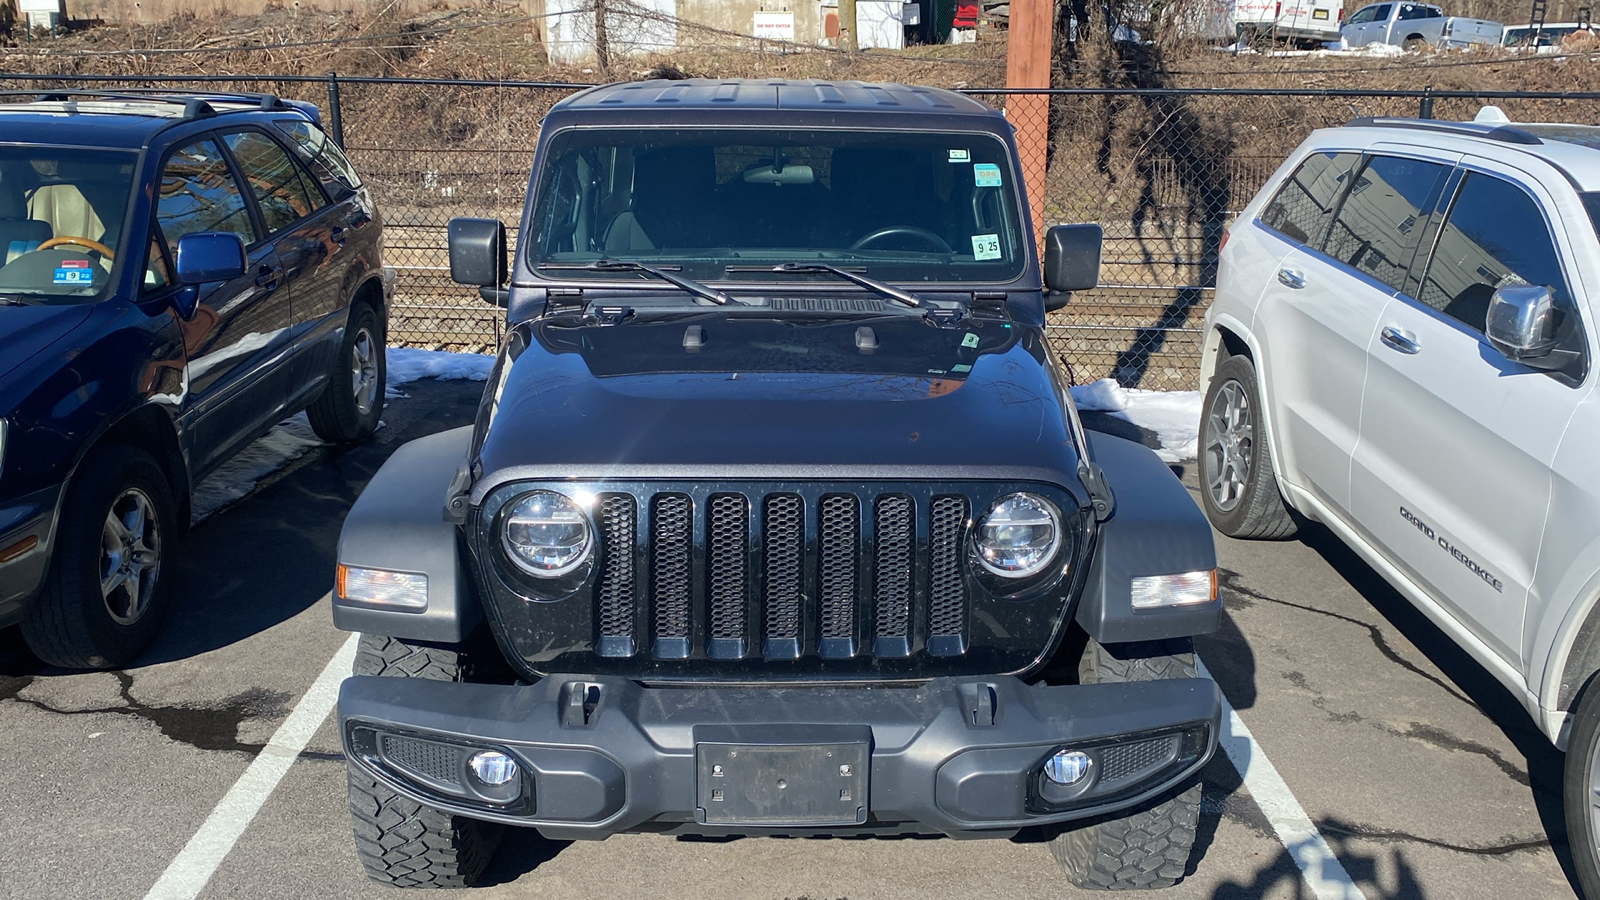 2021 Jeep Wrangler Unlimited Willys 4